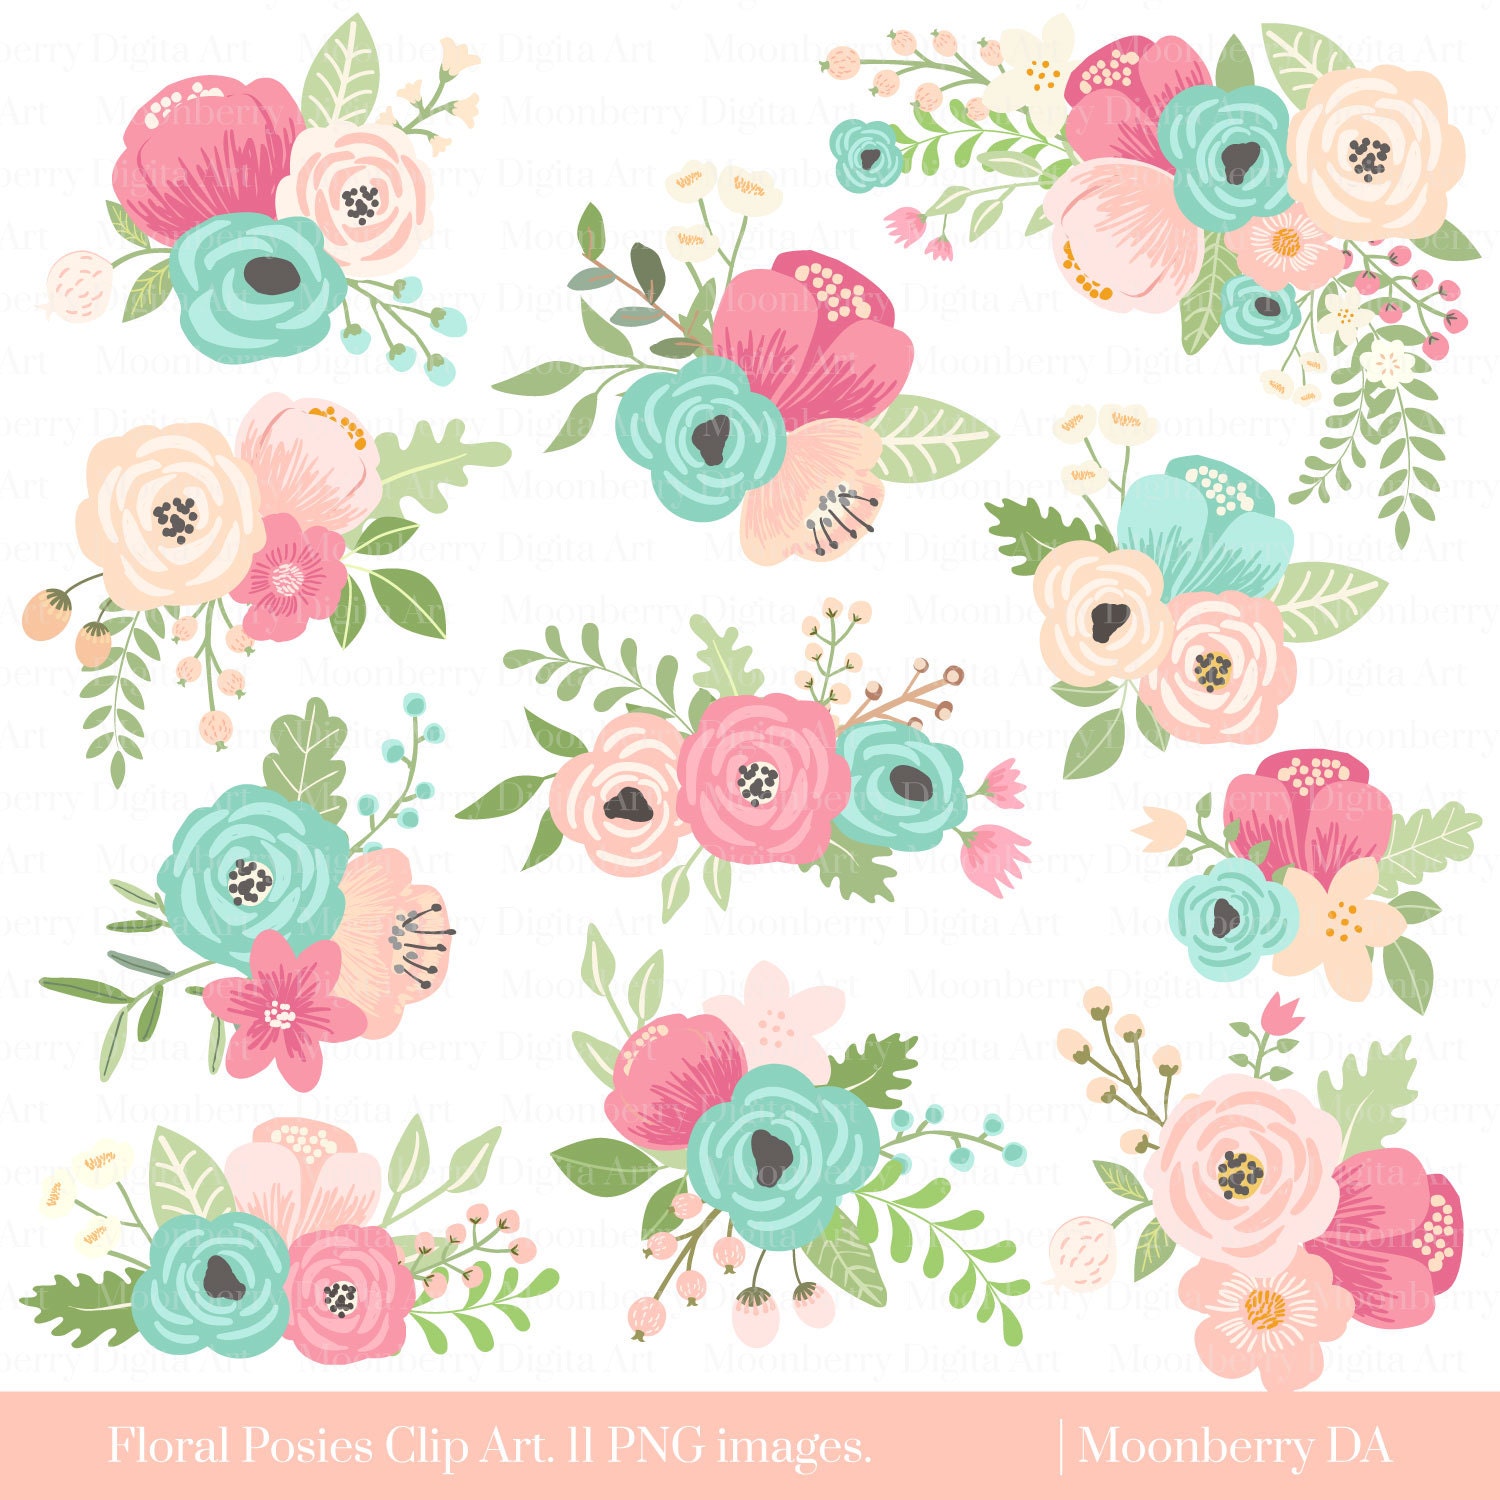 flower clipart for wedding invitations - photo #25